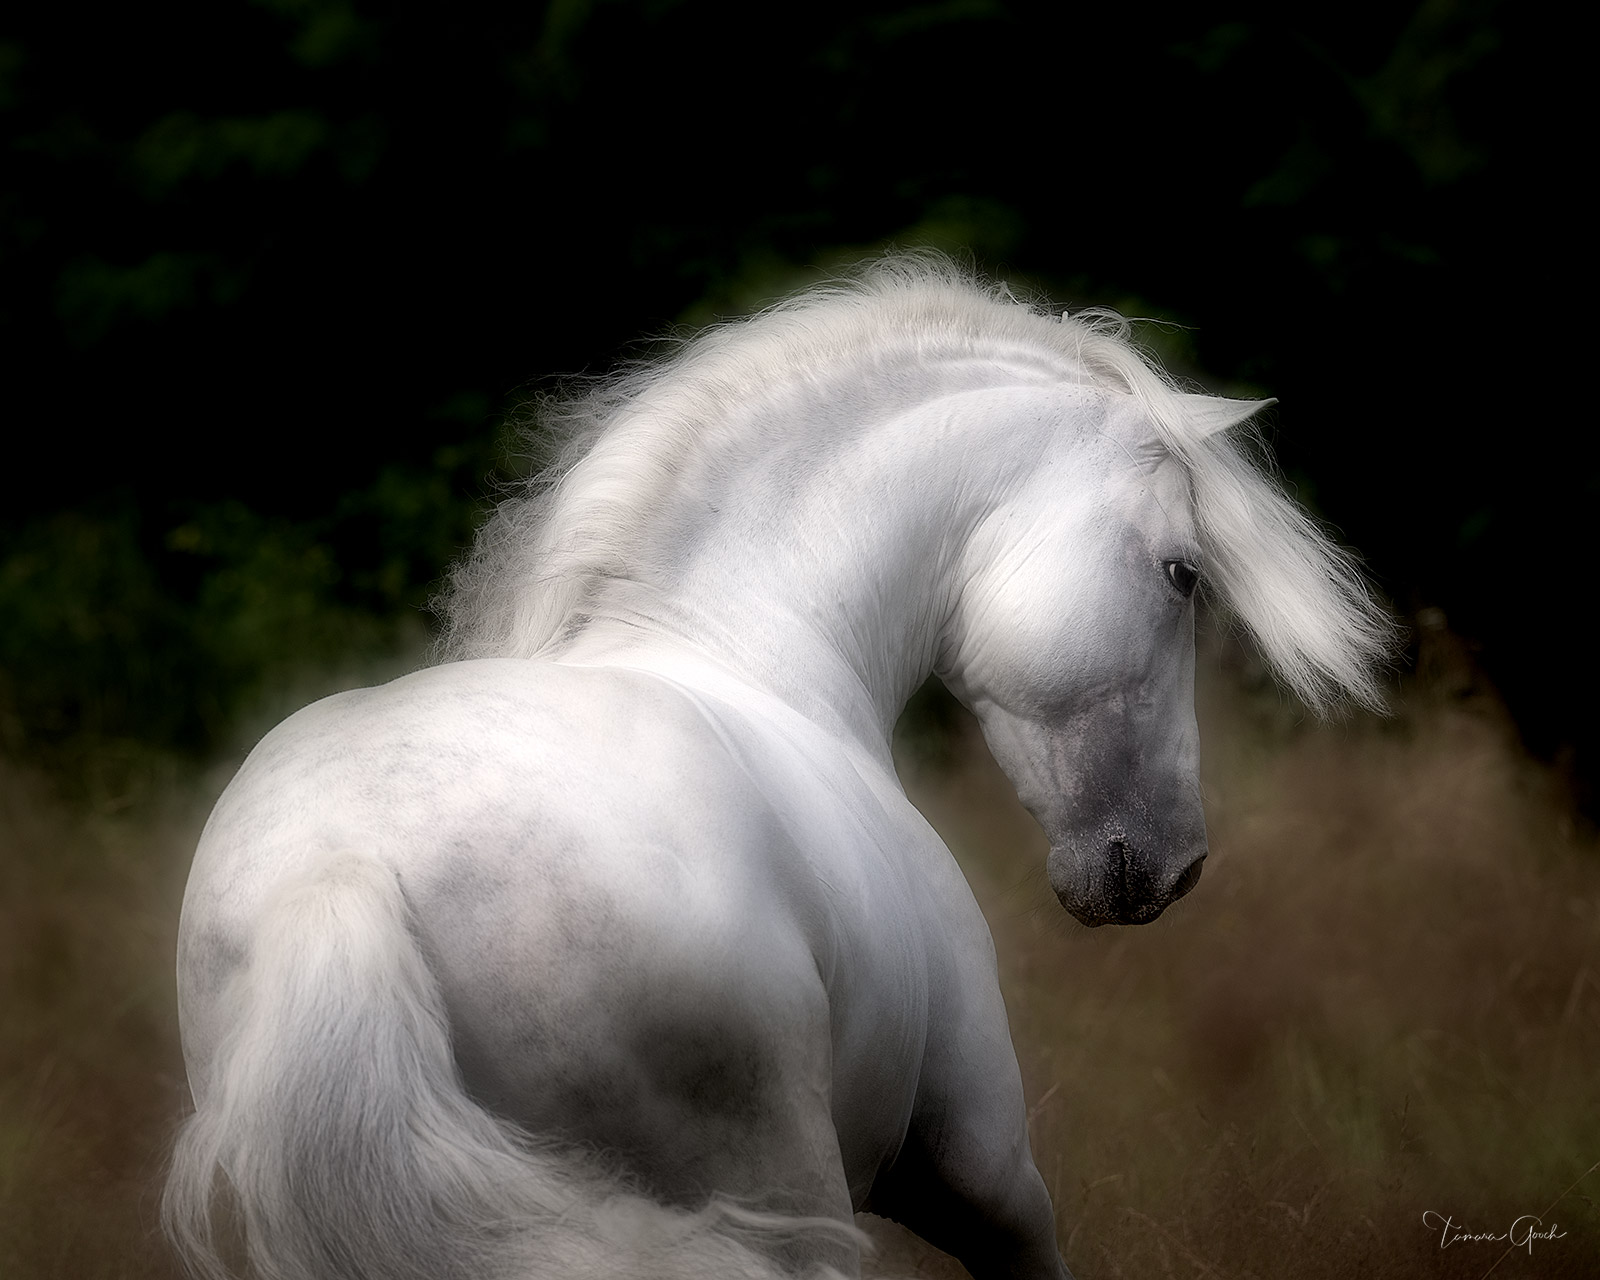 The beauty of the Pure Spanish Horse or Andalusian is captured in this exquisite photograph. Wall art, limited edition print, artwork for sale.